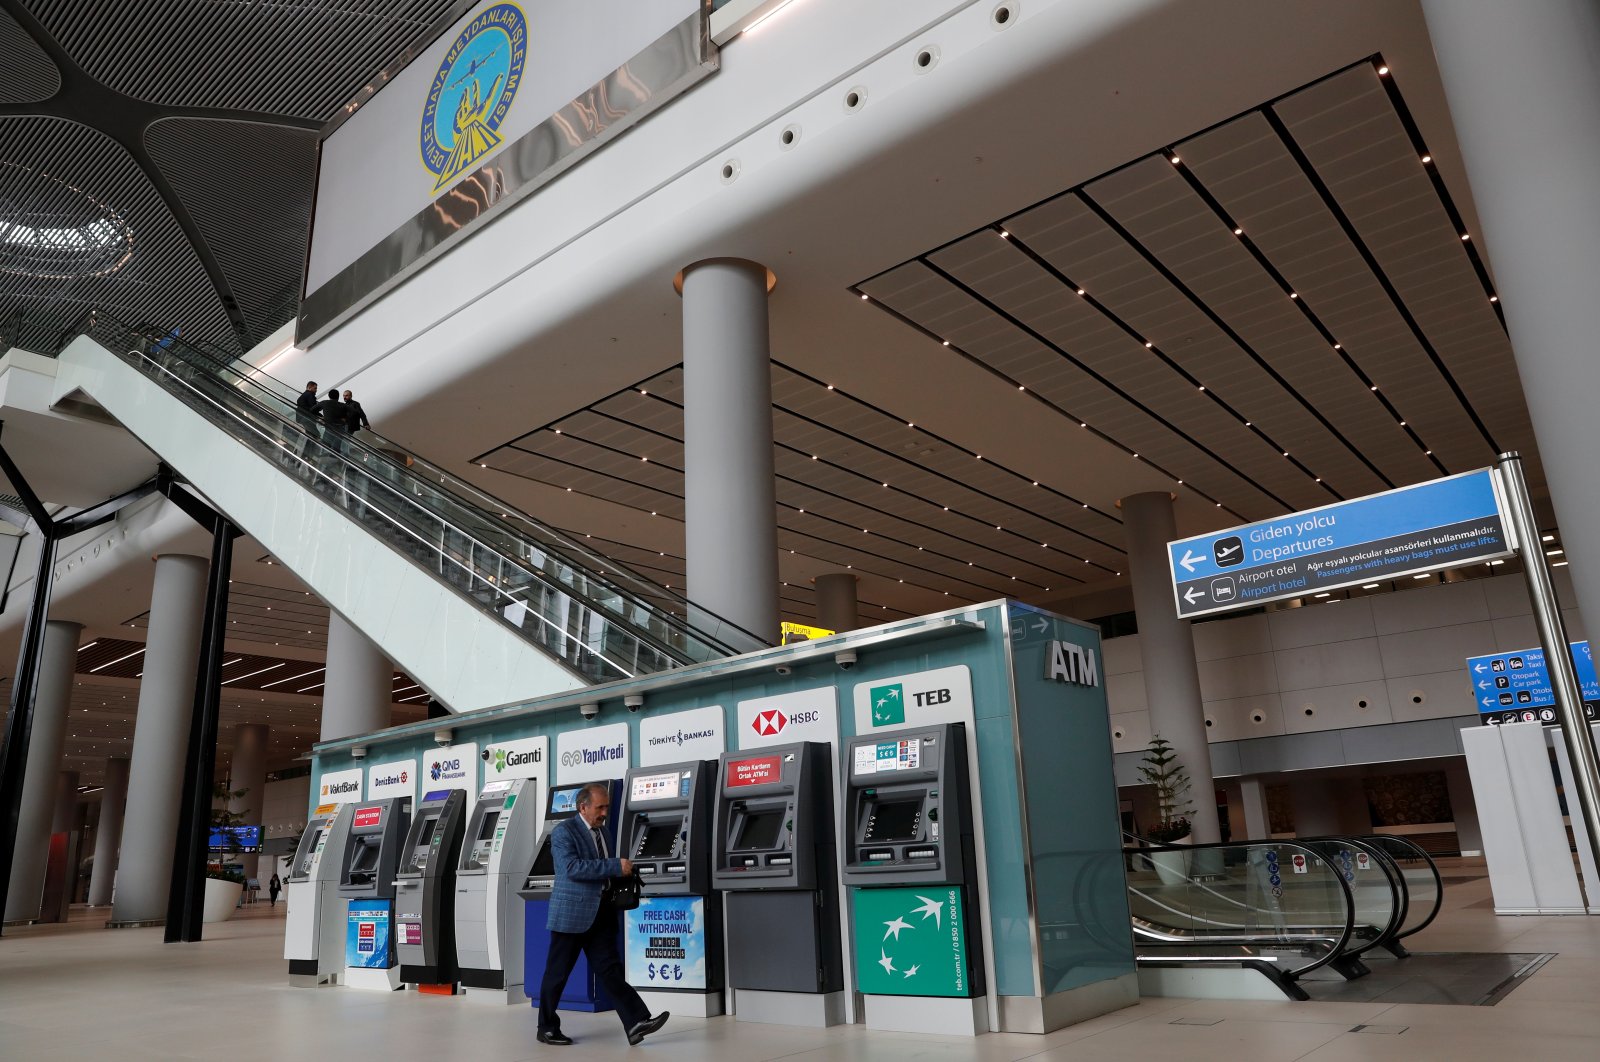 A man walks past ATM machines at the arrivals terminal of Istanbul International Airport, Istanbul, Turkey, April 3, 2019. (Reuters Photo)